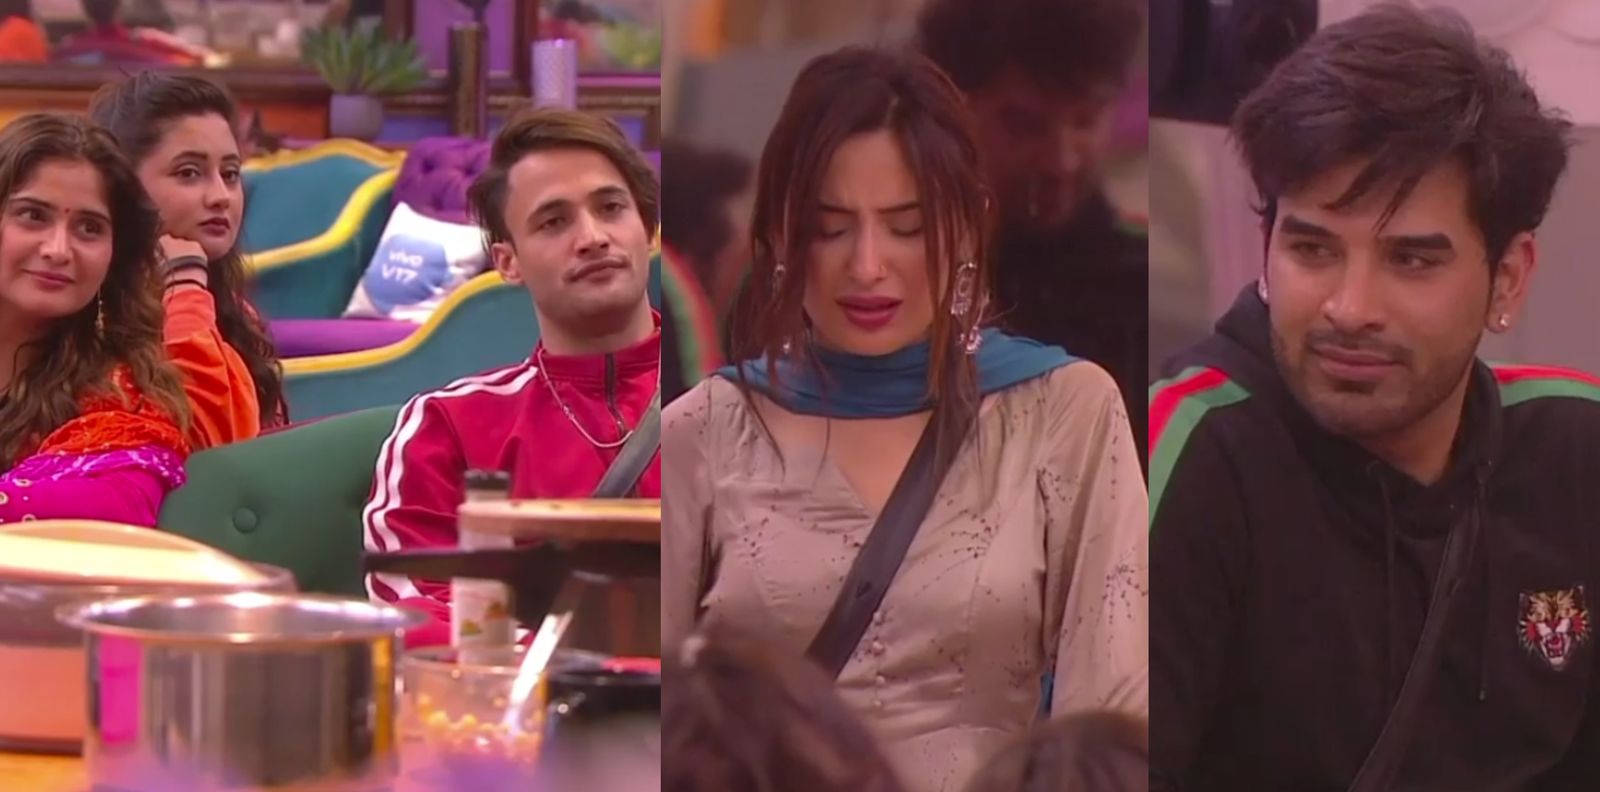 Bigg Boss 13 Preview: Paras Chhabra Says He Loves Mahira Sharma Despite Being In A Relationship!